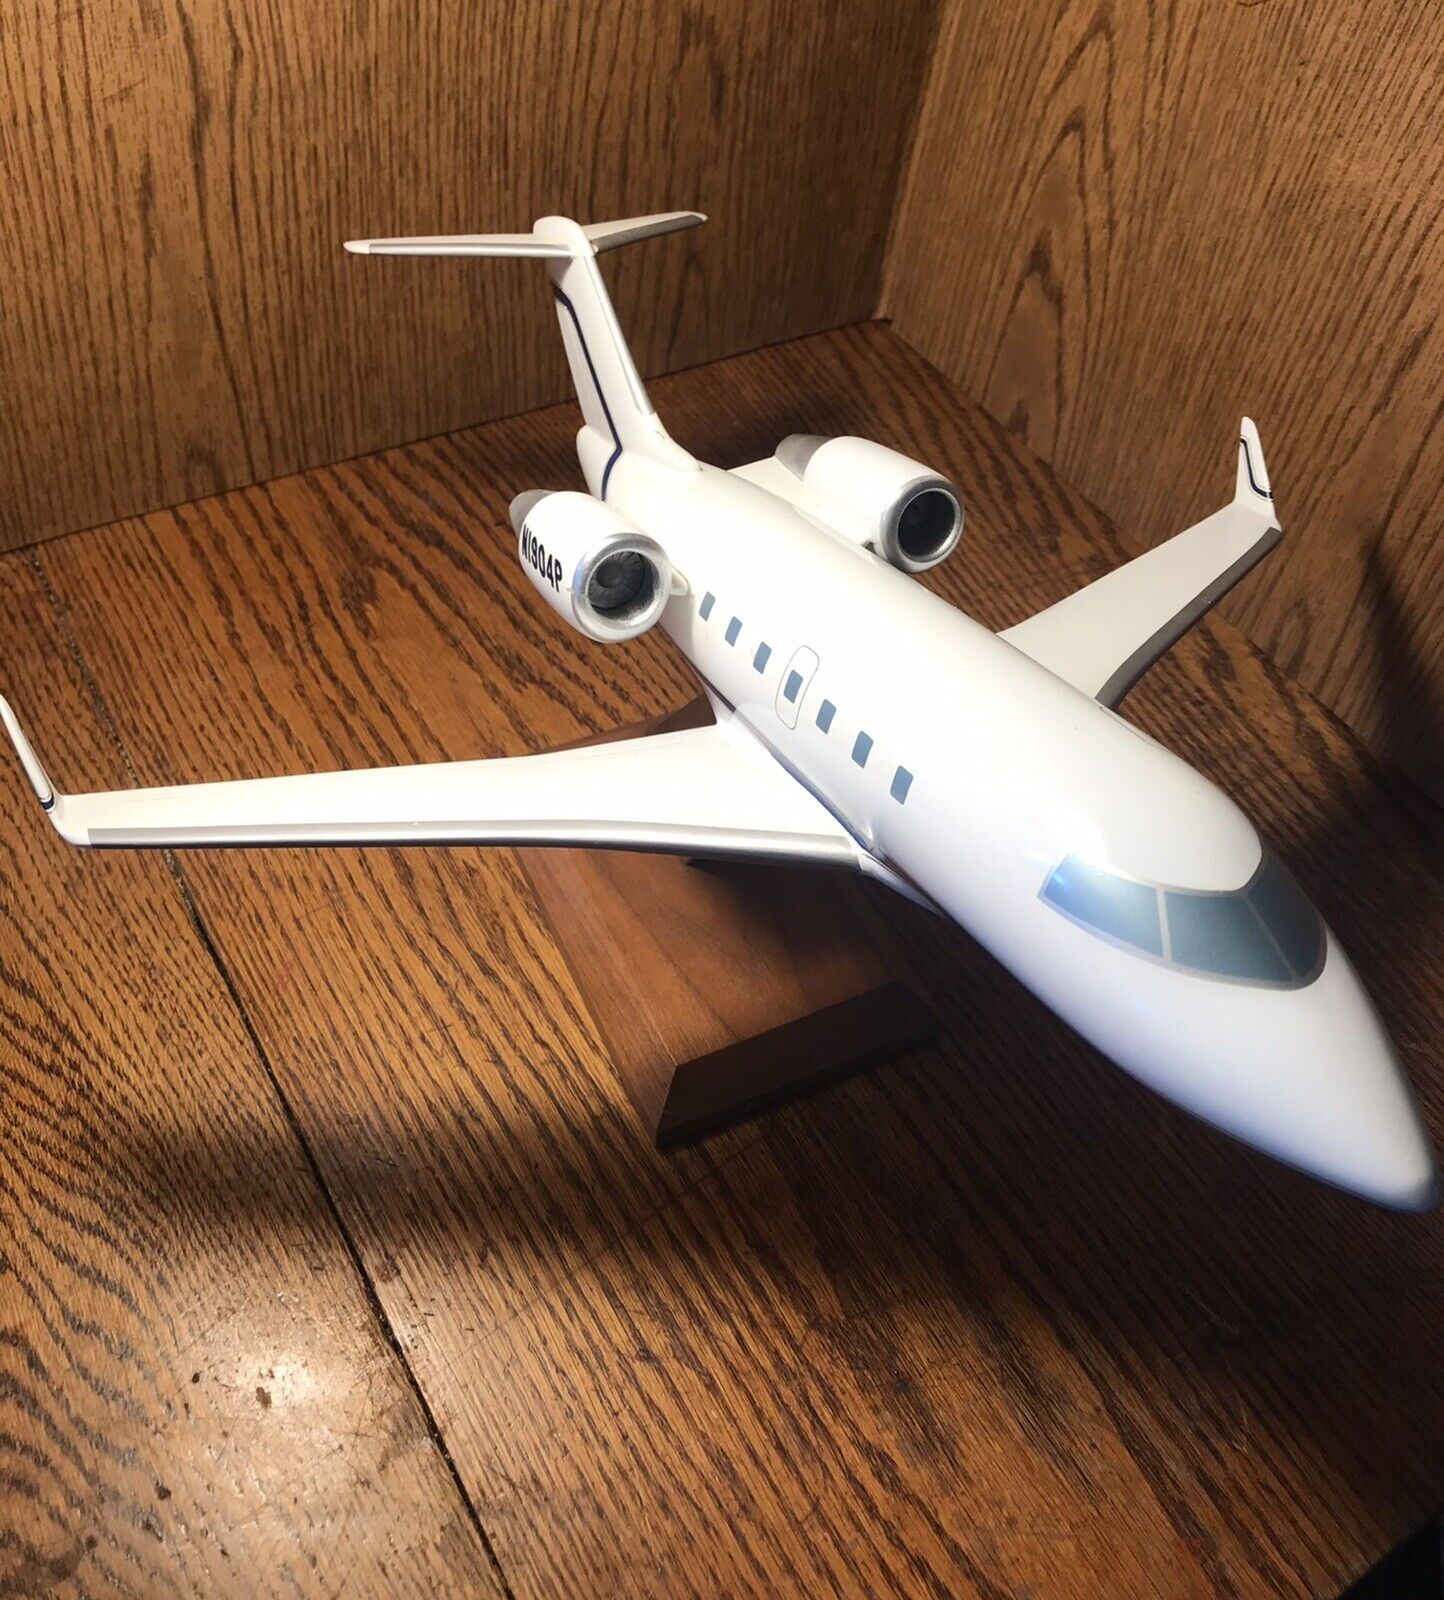 Circa 1980s model Of  “Bombardier Challenger Jet  “by Micro West Inc.